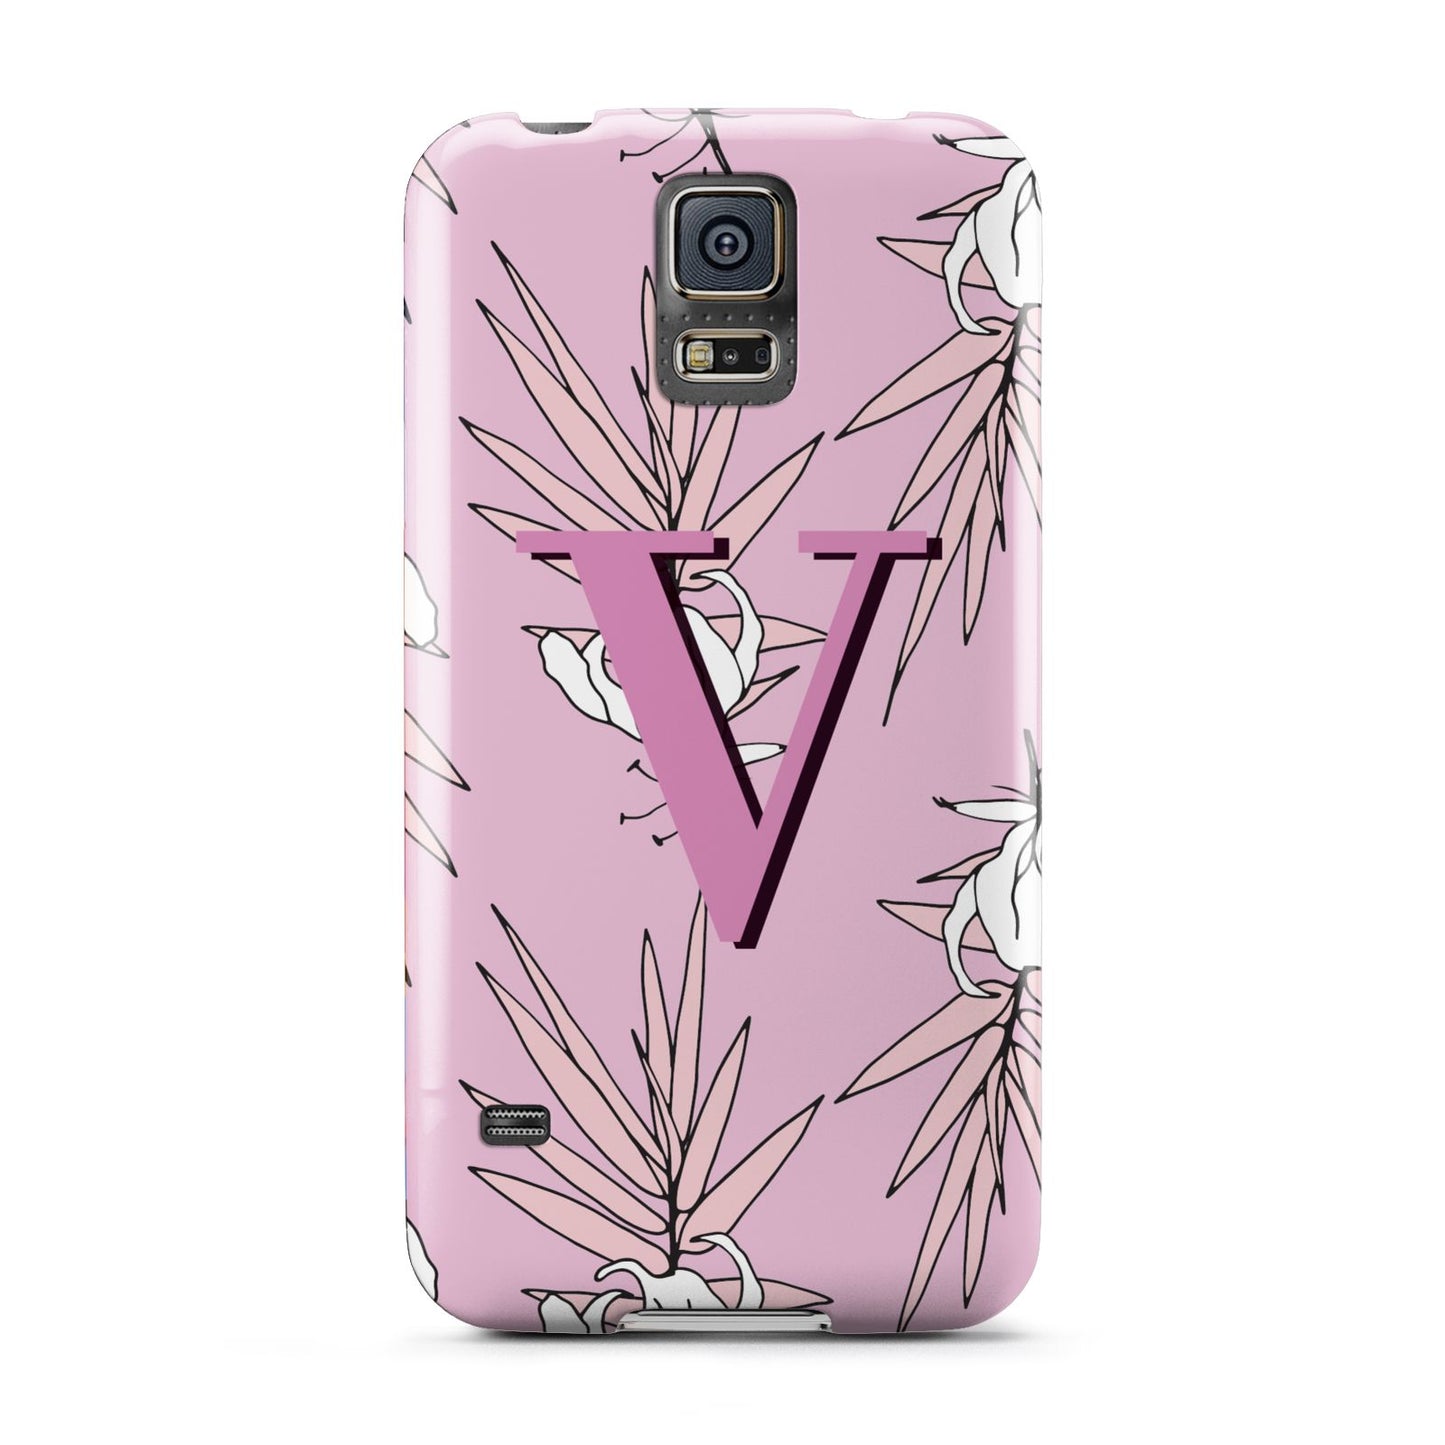 Personalised Pink and White Floral Monogram Samsung Galaxy S5 Case